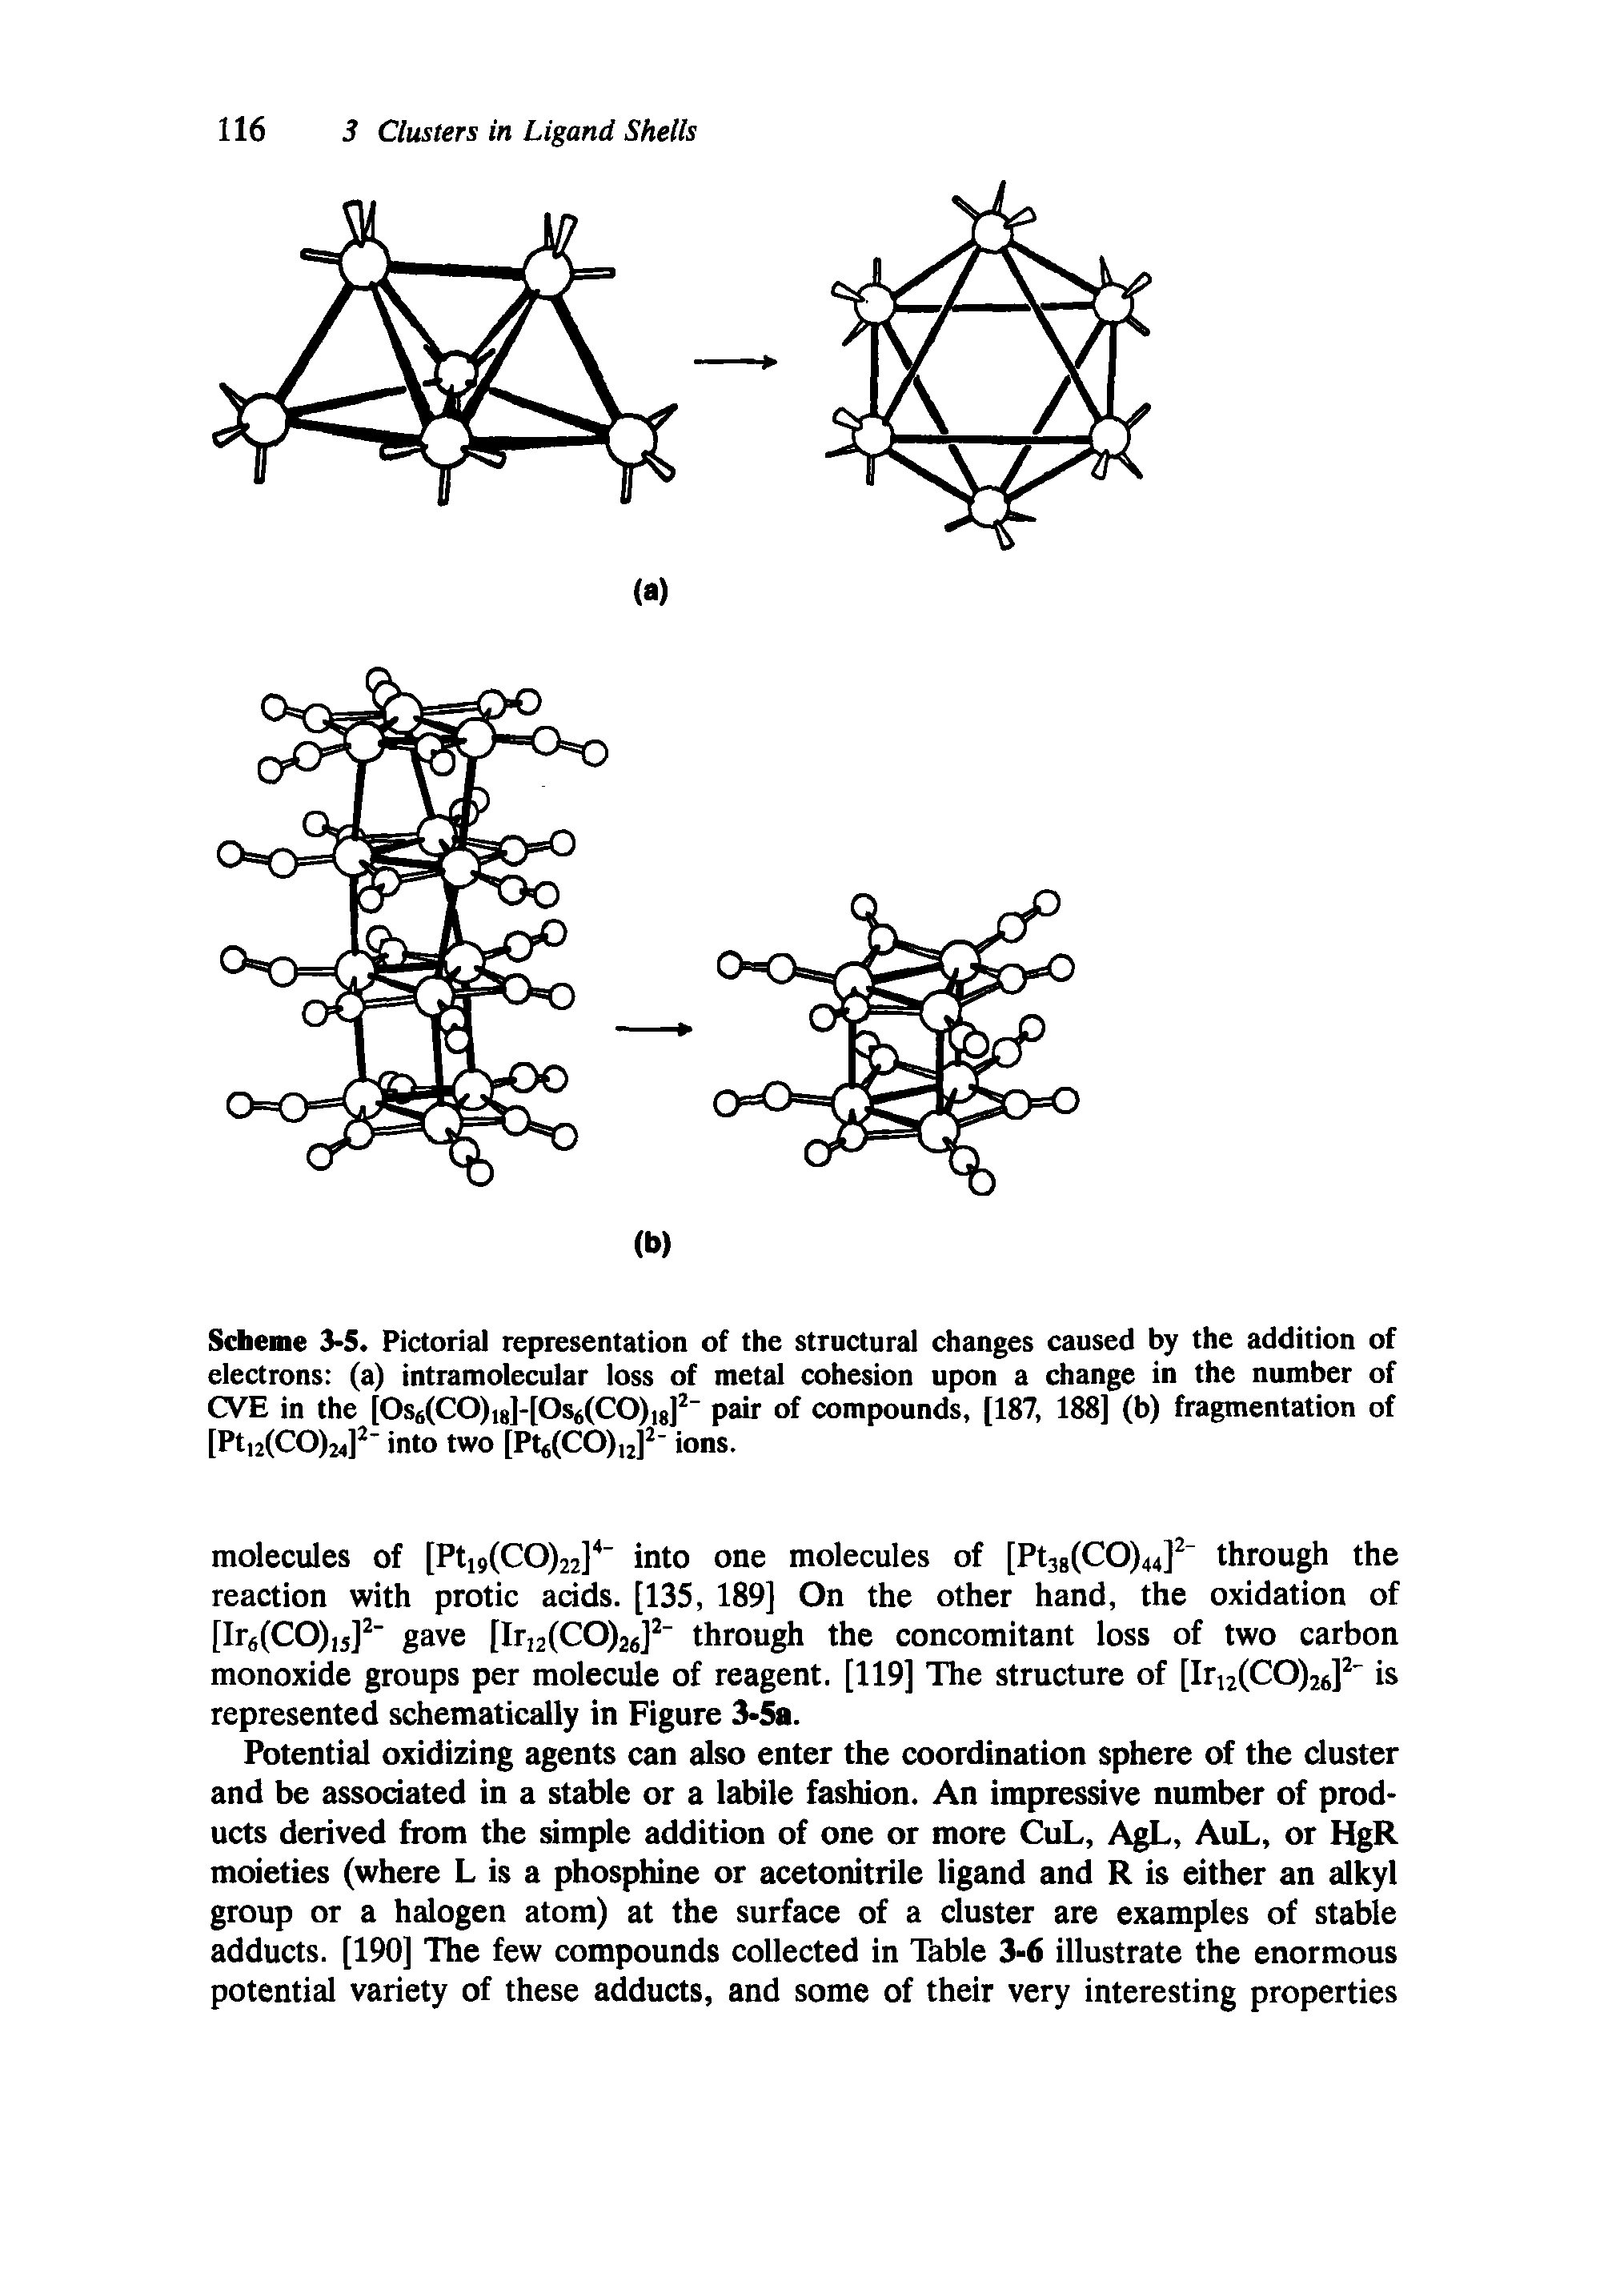 Scheme 3-5. Pictorial representation of the structural changes caused by the addition of electrons (a) intramolecular loss of metal cohesion upon a change in the number of CVE in the [Os6(CO)i8]-[Os6(CO)i8] pair of compounds, [187, 188] (b) fragmentation of [Pti2(CO)24] into two [Pt (CO)i2] ions.